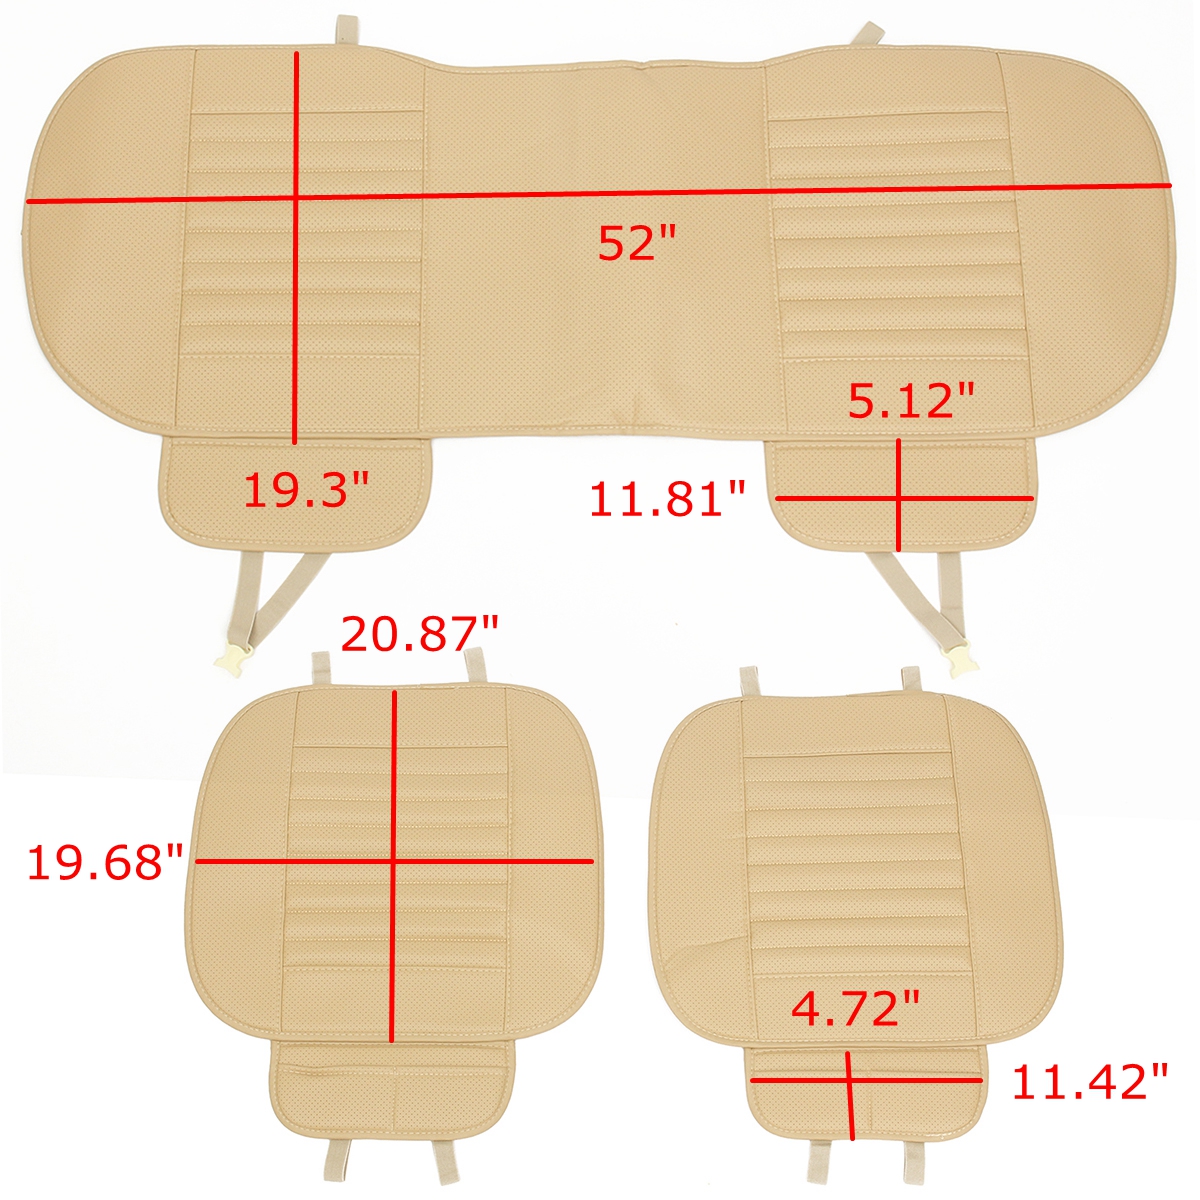 3 pcs 1Rear+2Front Car Universal Seat Cover Bamboo Breathable PU Leather Pad Chair Cushion US - image 2 of 12